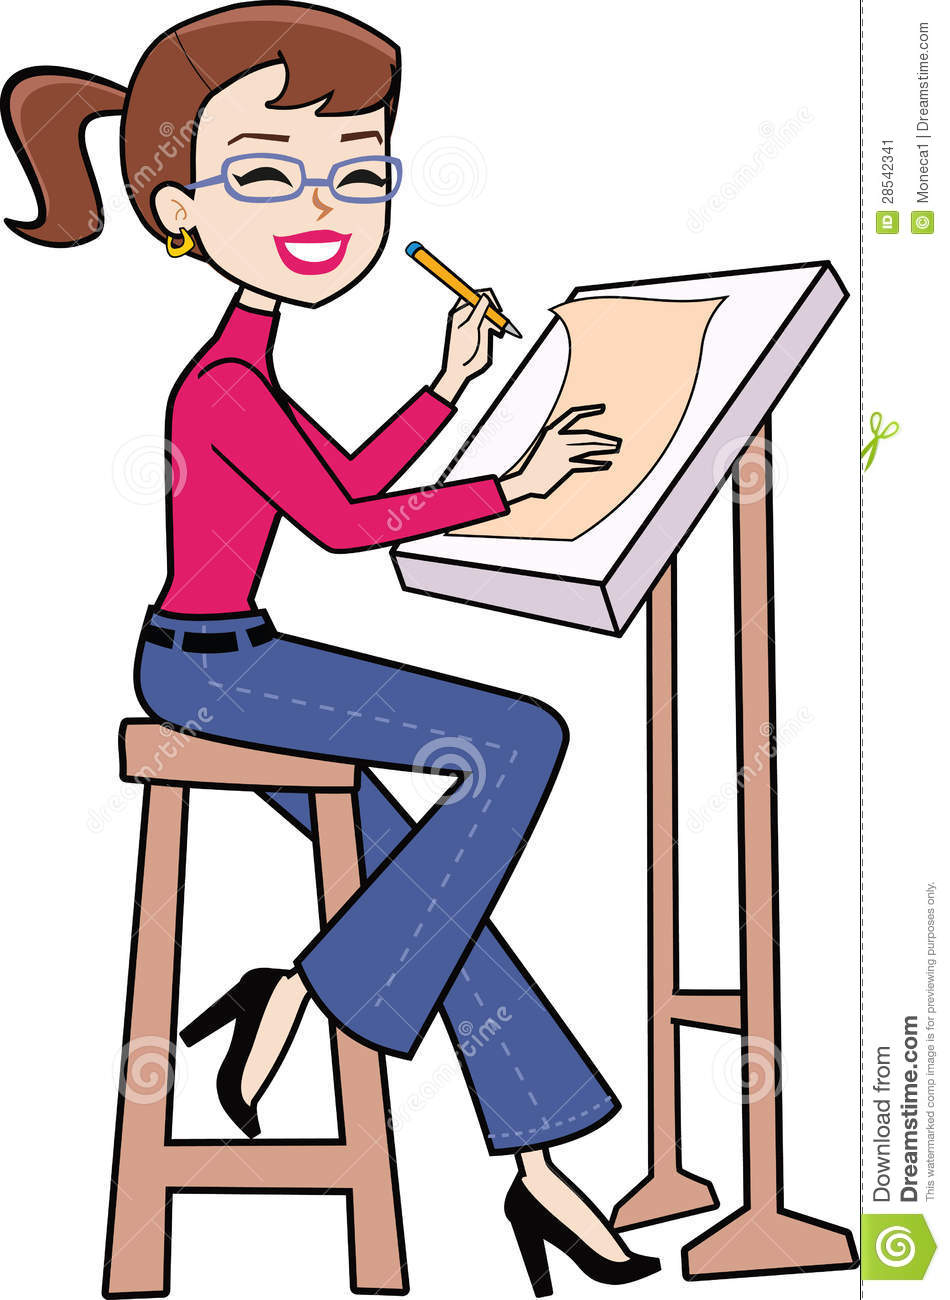 Retro Drawing Cartoon Woman Sitting And Making Plans On The Drawing